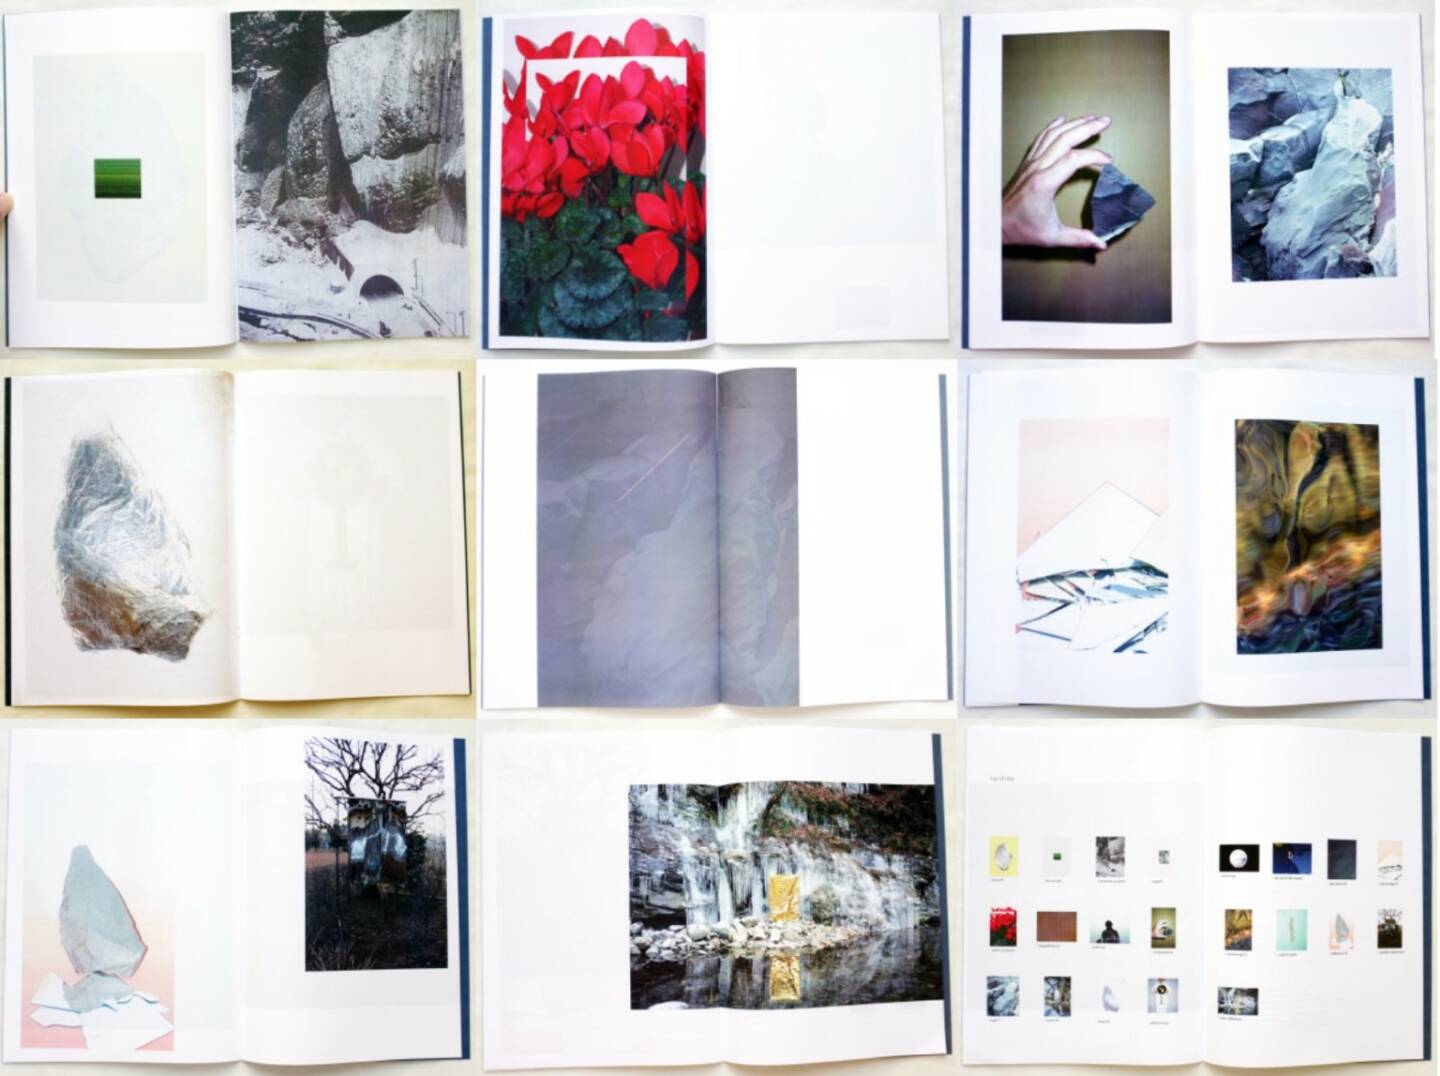 Hiroshi Takizawa - A rock of the moon (new version), Self published 2014, Beispielseiten, sample spreads - http://josefchladek.com/book/hiroshi_takizawa_-_a_rock_of_the_moon_new_version